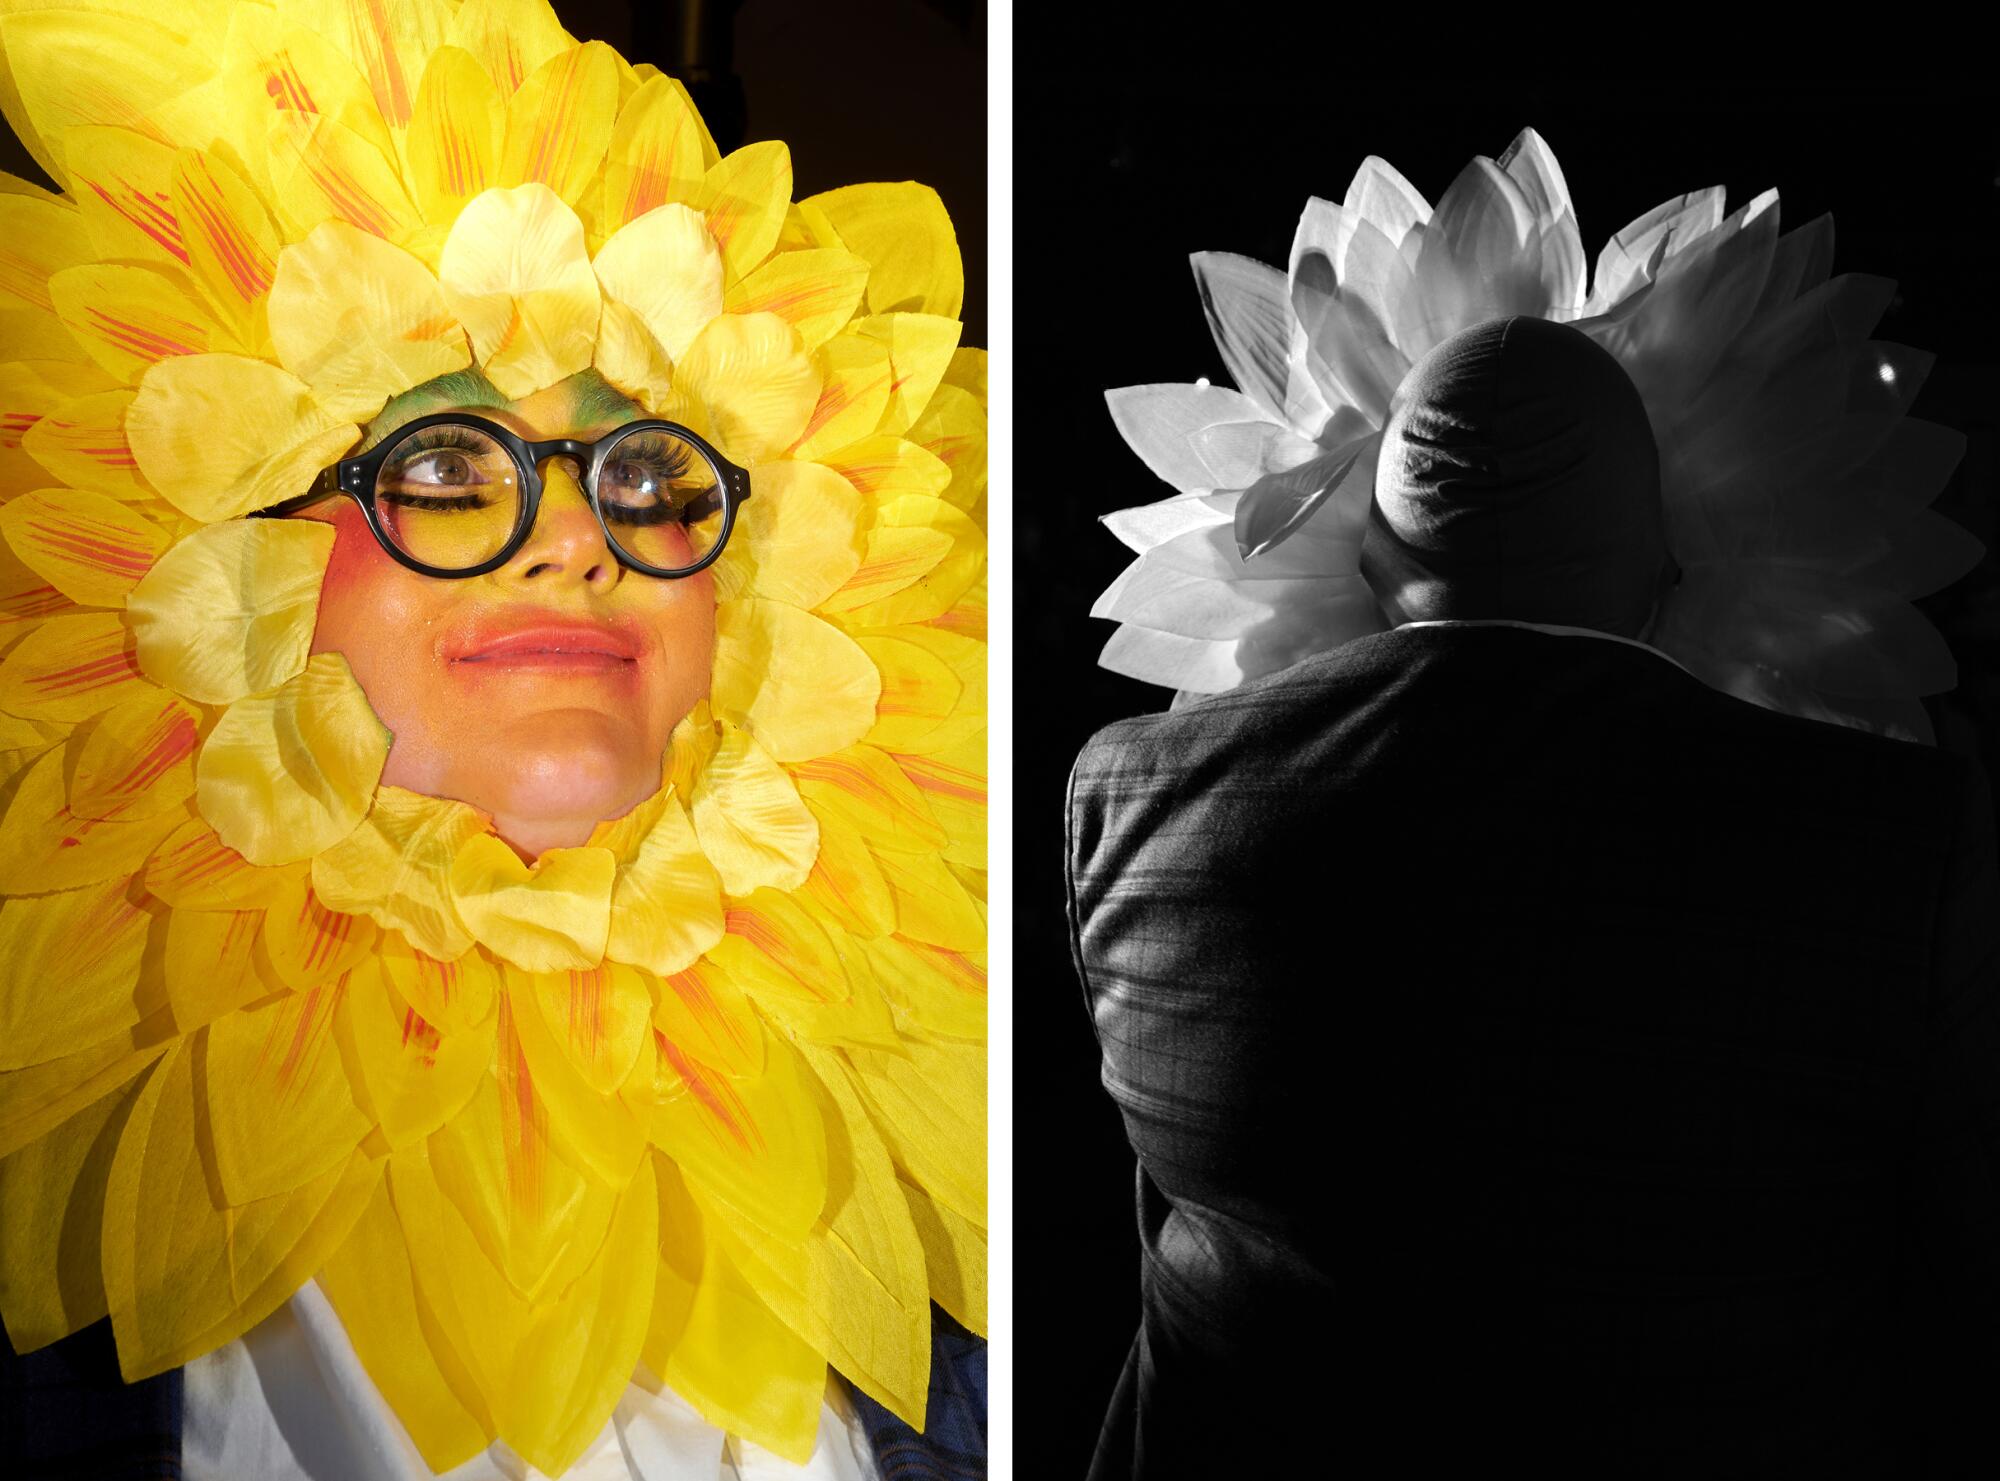 Side-by-side photos of a person with glasses, dressed as a yellow flower